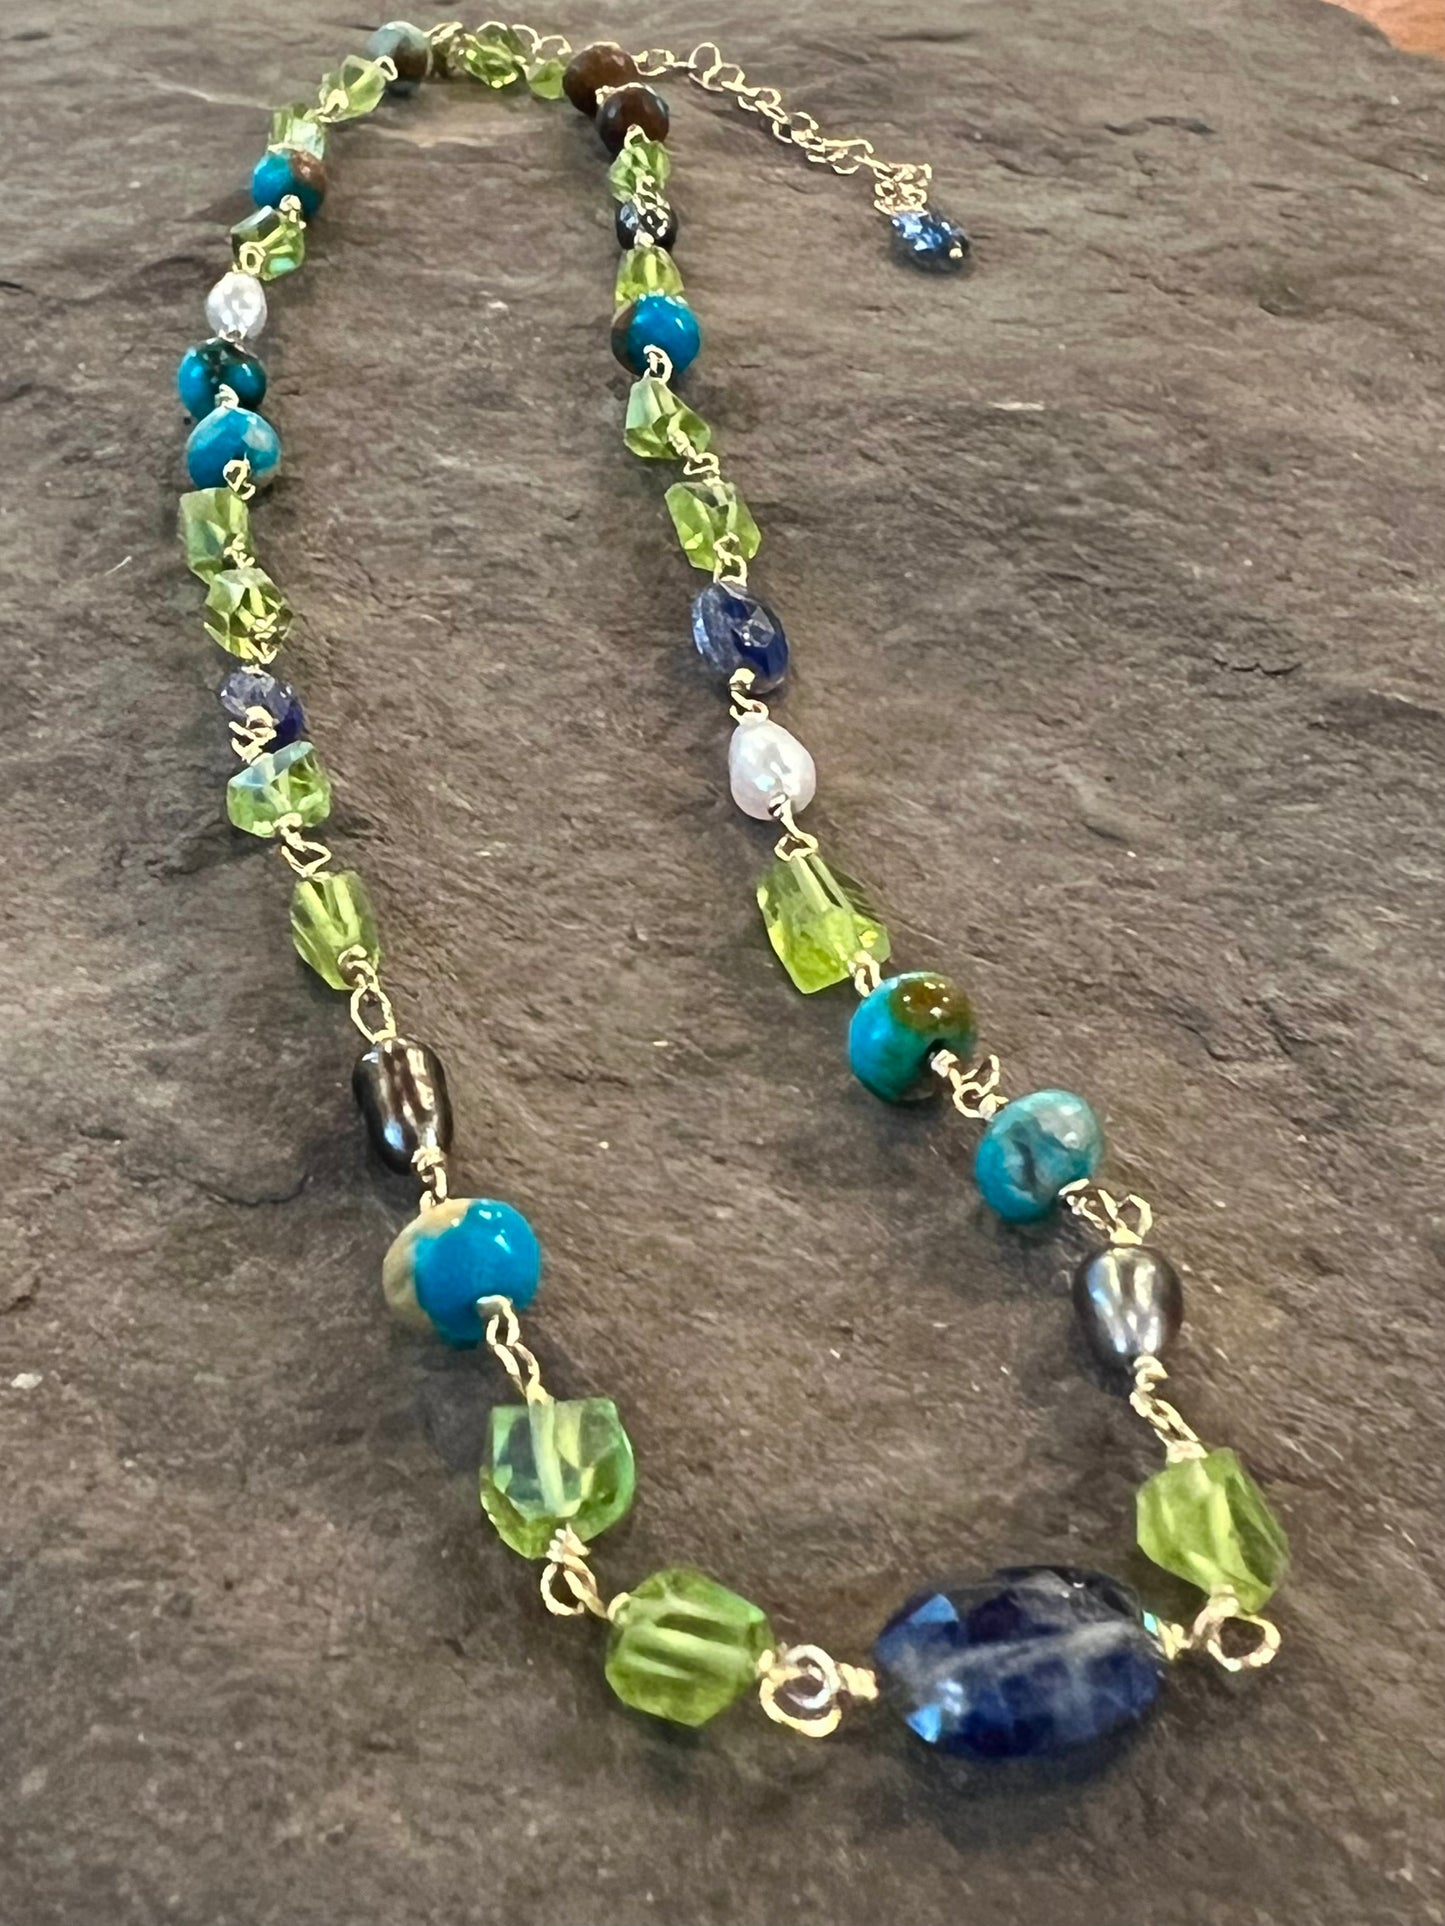 Water’s Edge Necklace- One of a Kind - 14k Peridot Kyanite Turquoise